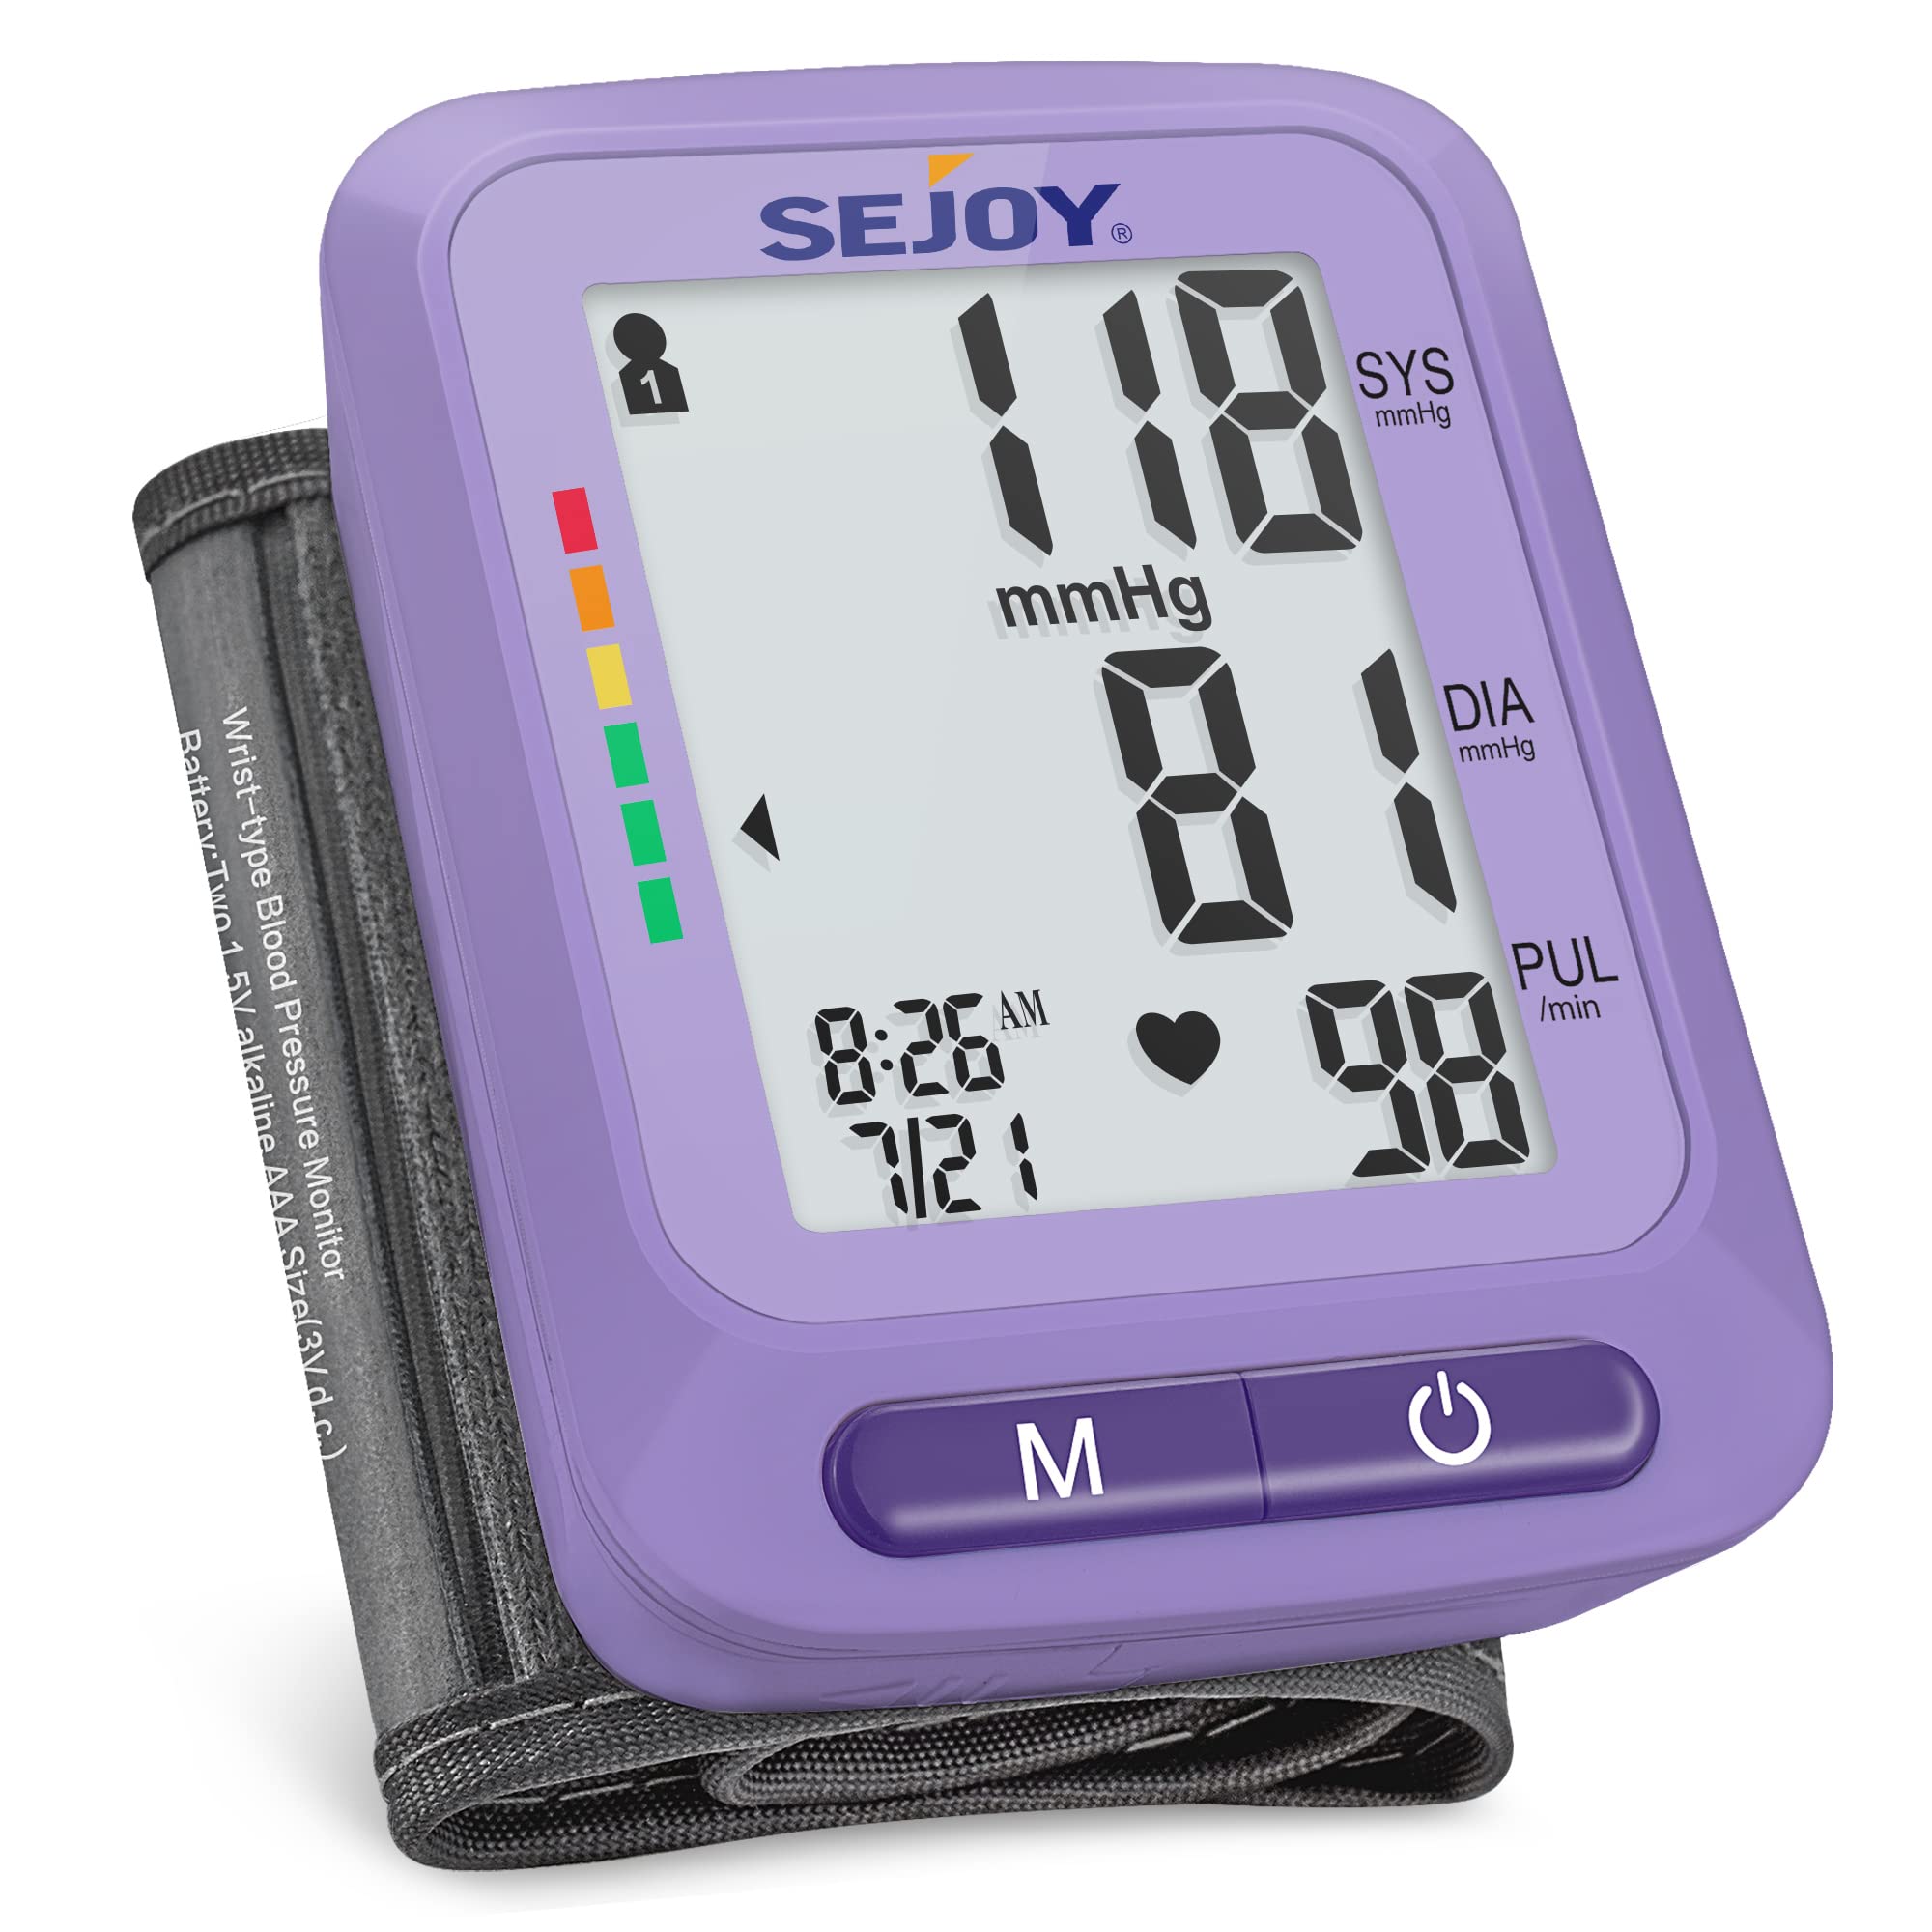 Continuous Blood Pressure Monitor - בריאות